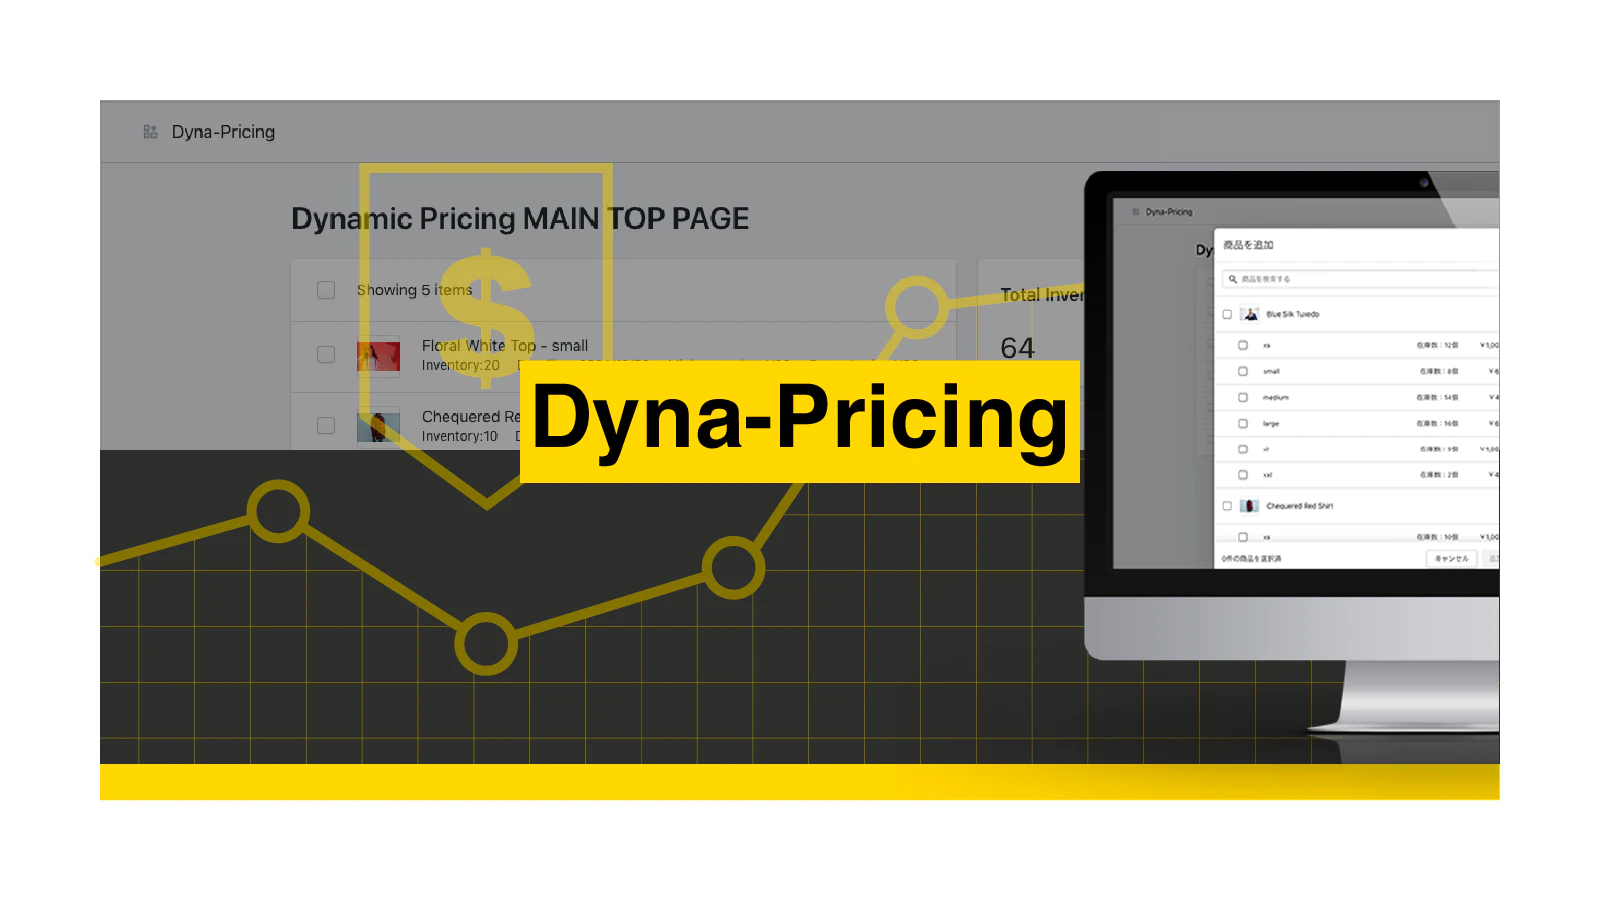 Dyna-Pricing